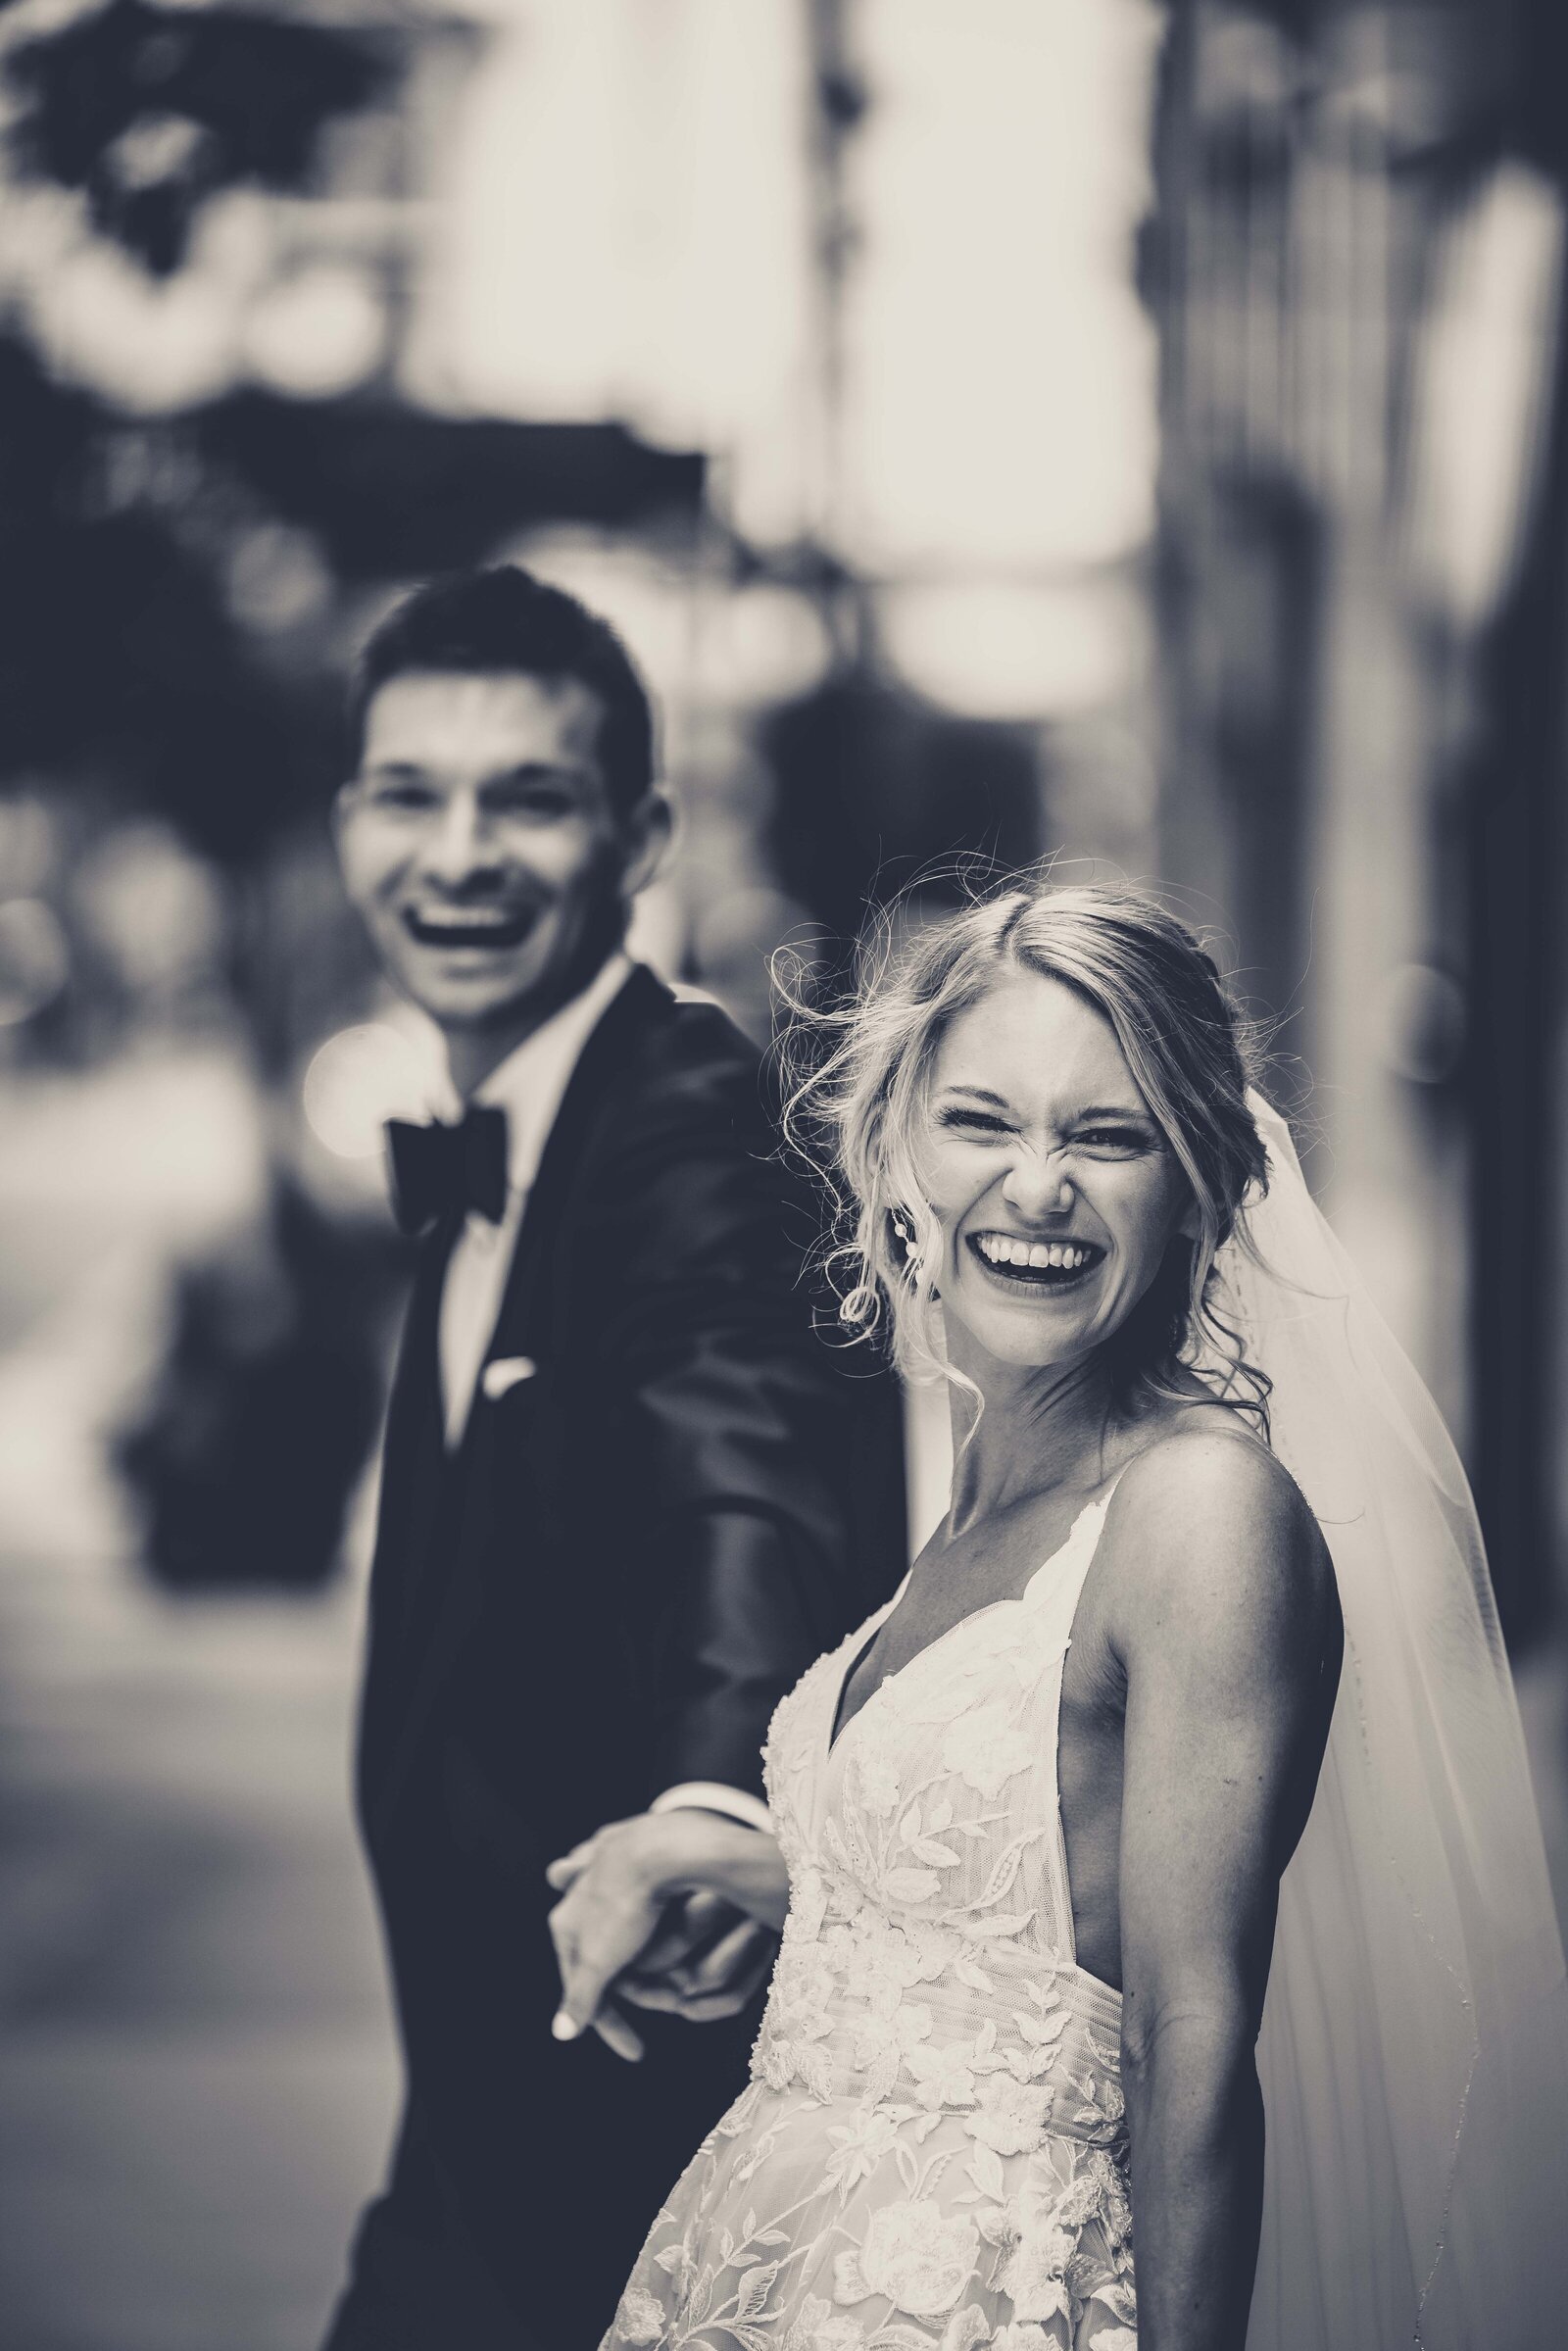 Experience the genuine joy and infectious laughter of Hailey and Peter captured during their special day. This heartwarming image showcases the couple's spontaneous laughter and the carefree spirit of their wedding celebration. Perfect for those seeking wedding inspiration that emphasizes real, unscripted moments of joy and connection, this photograph highlights the power of love and laughter in creating unforgettable memories.